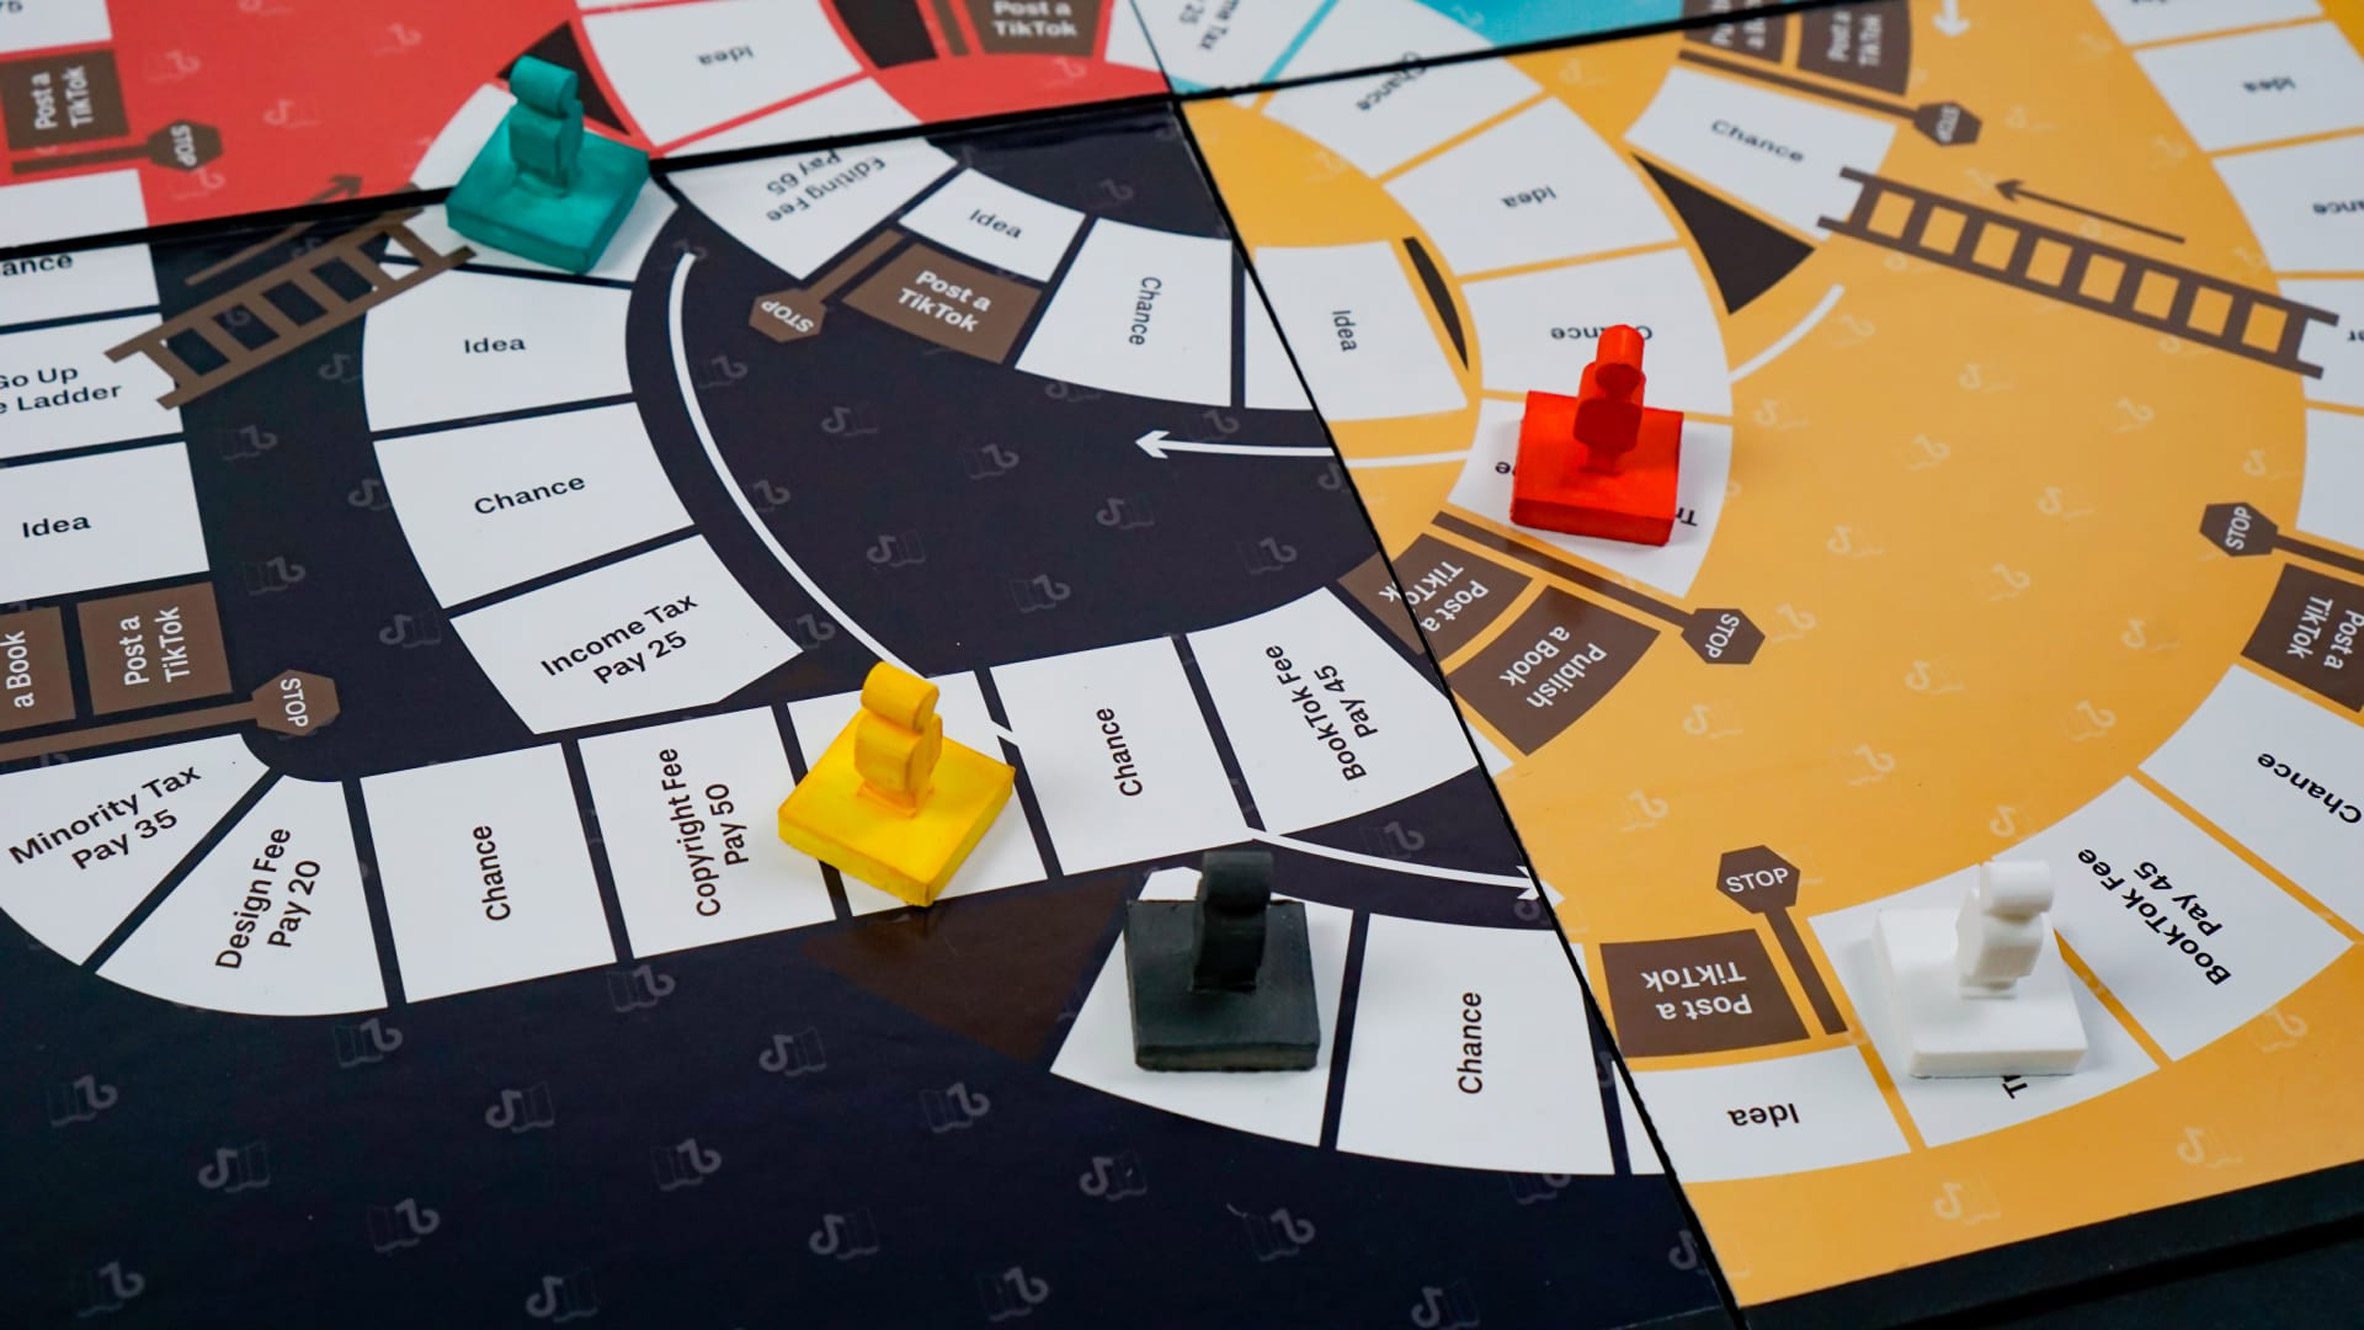 Board game inspired by the book industry and marginalised authors